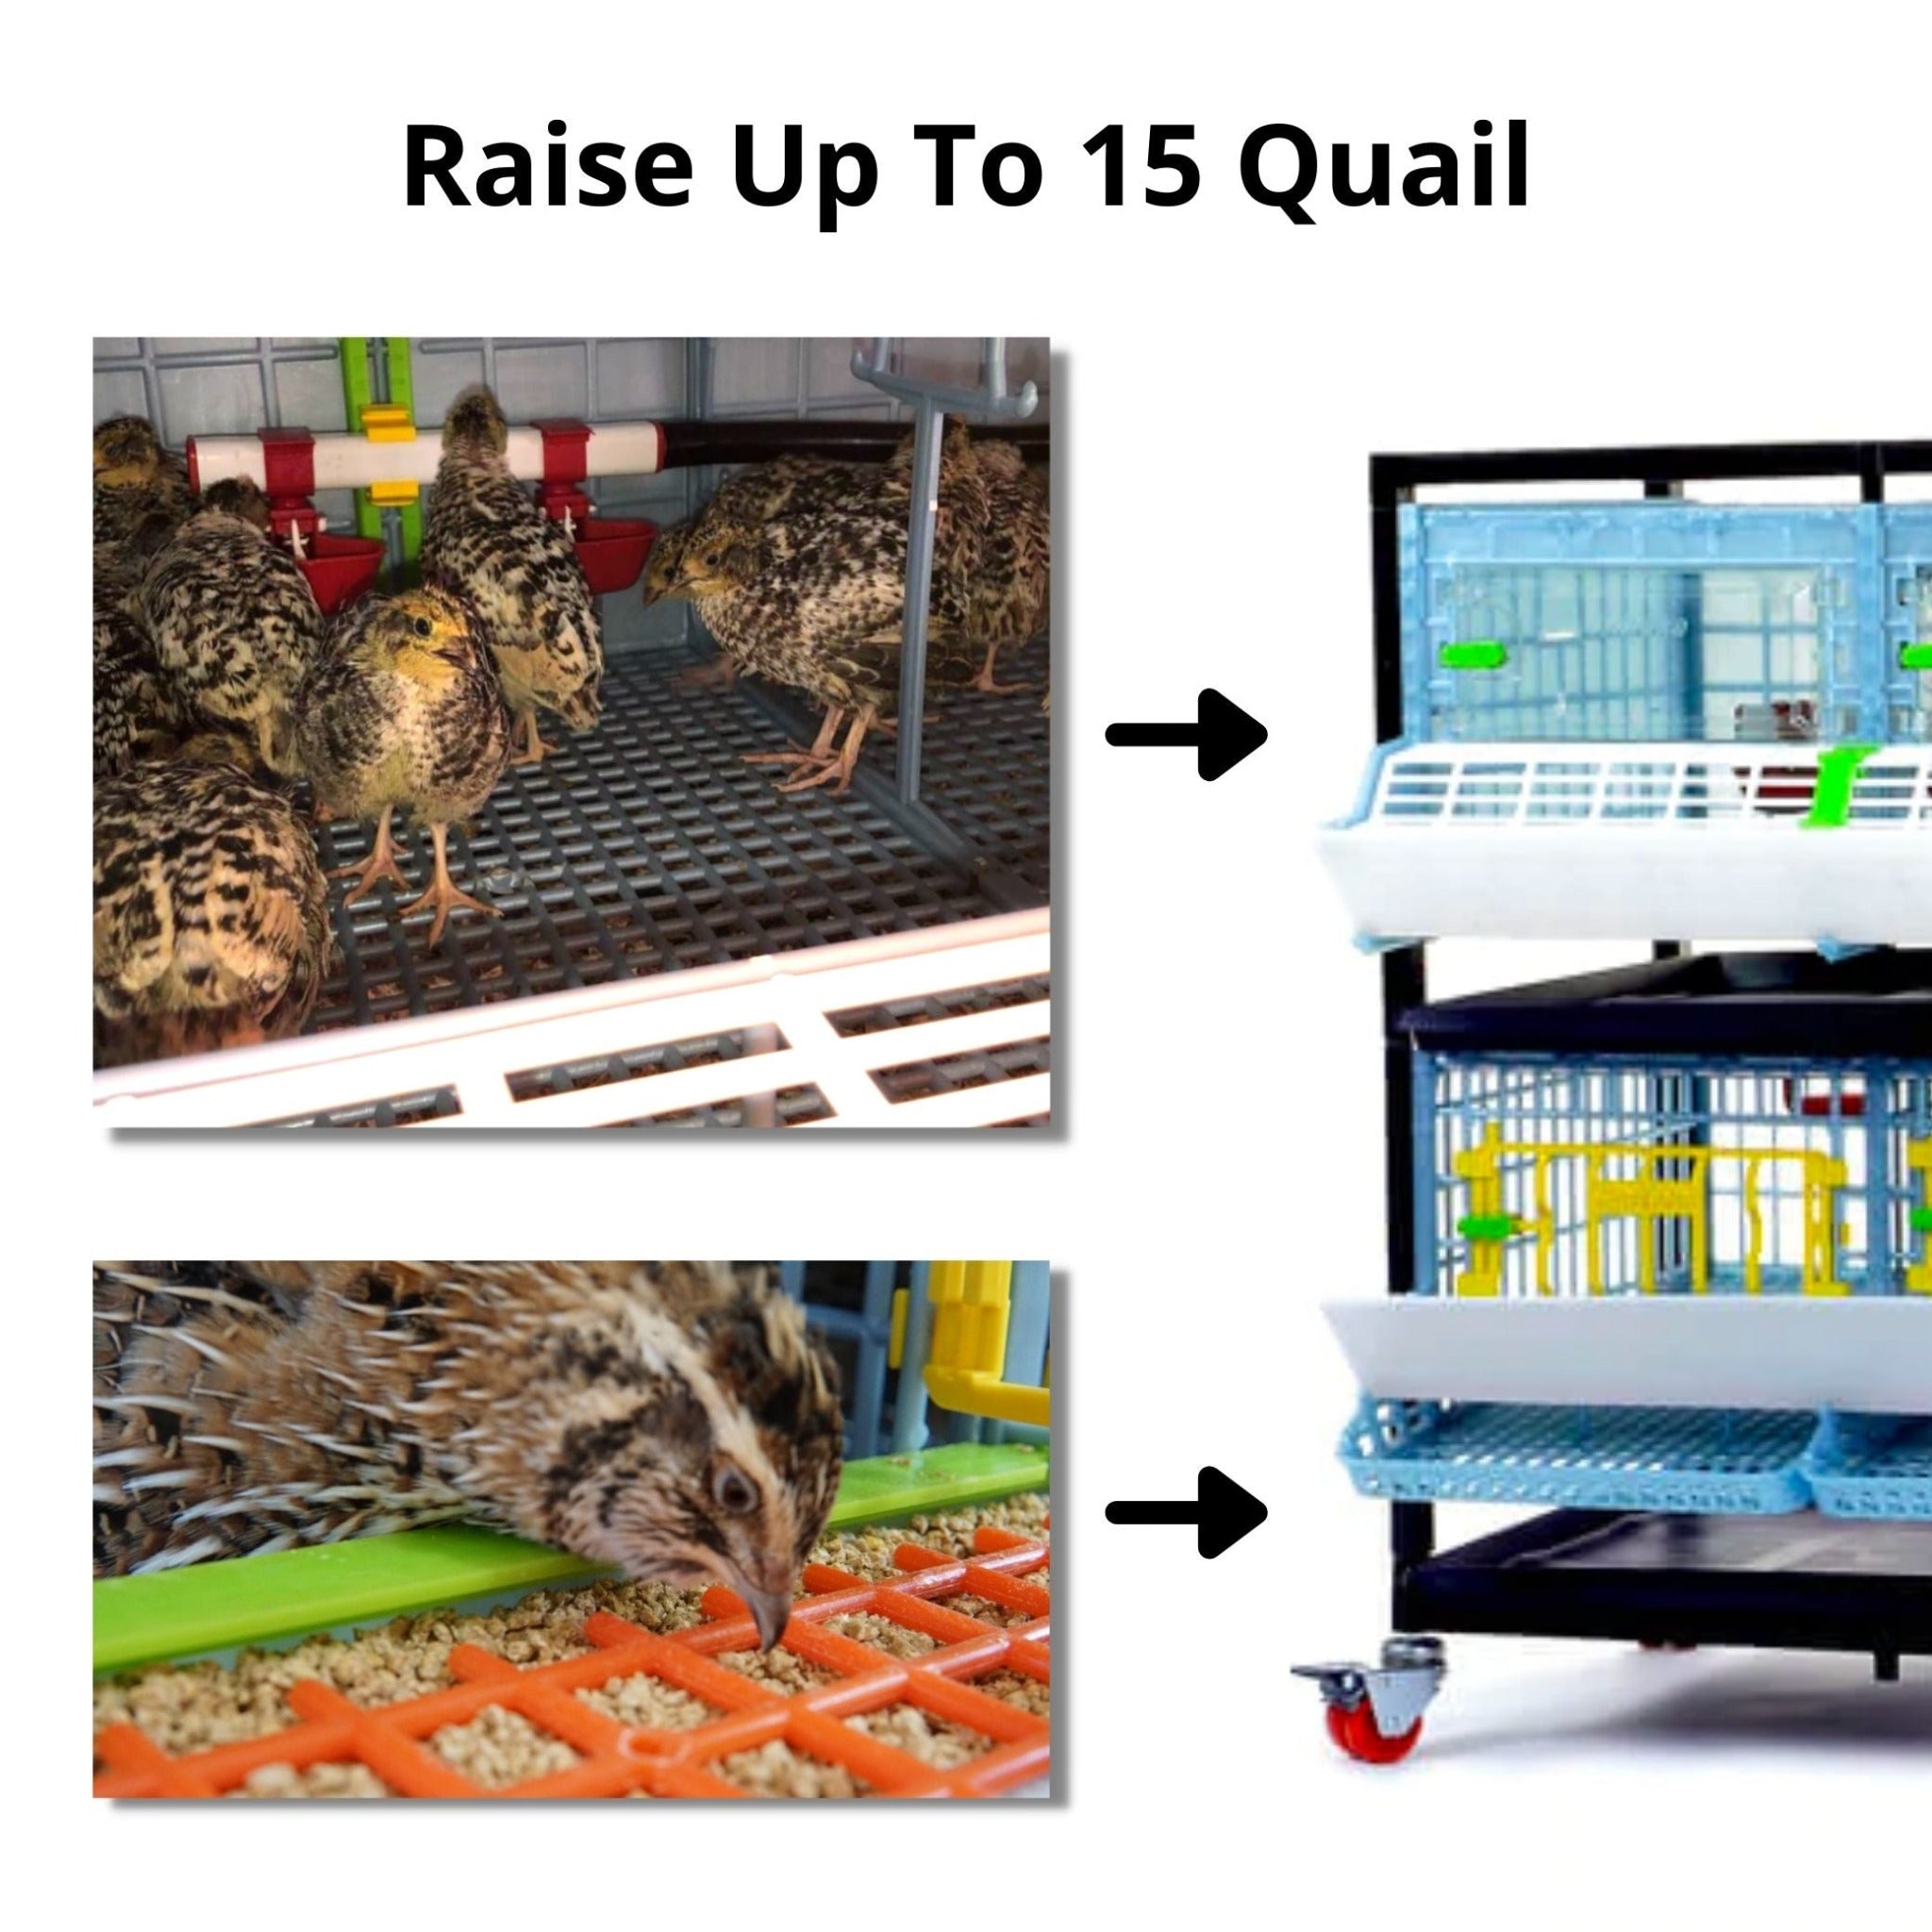 Hatching Time Cimuka. Image shows the life stages in which quail would go into the brooder and then the quail cage. Chicks go in the brooder, adult quail go in the quail cage. Text in image reads: Raise up to 15 Quail.